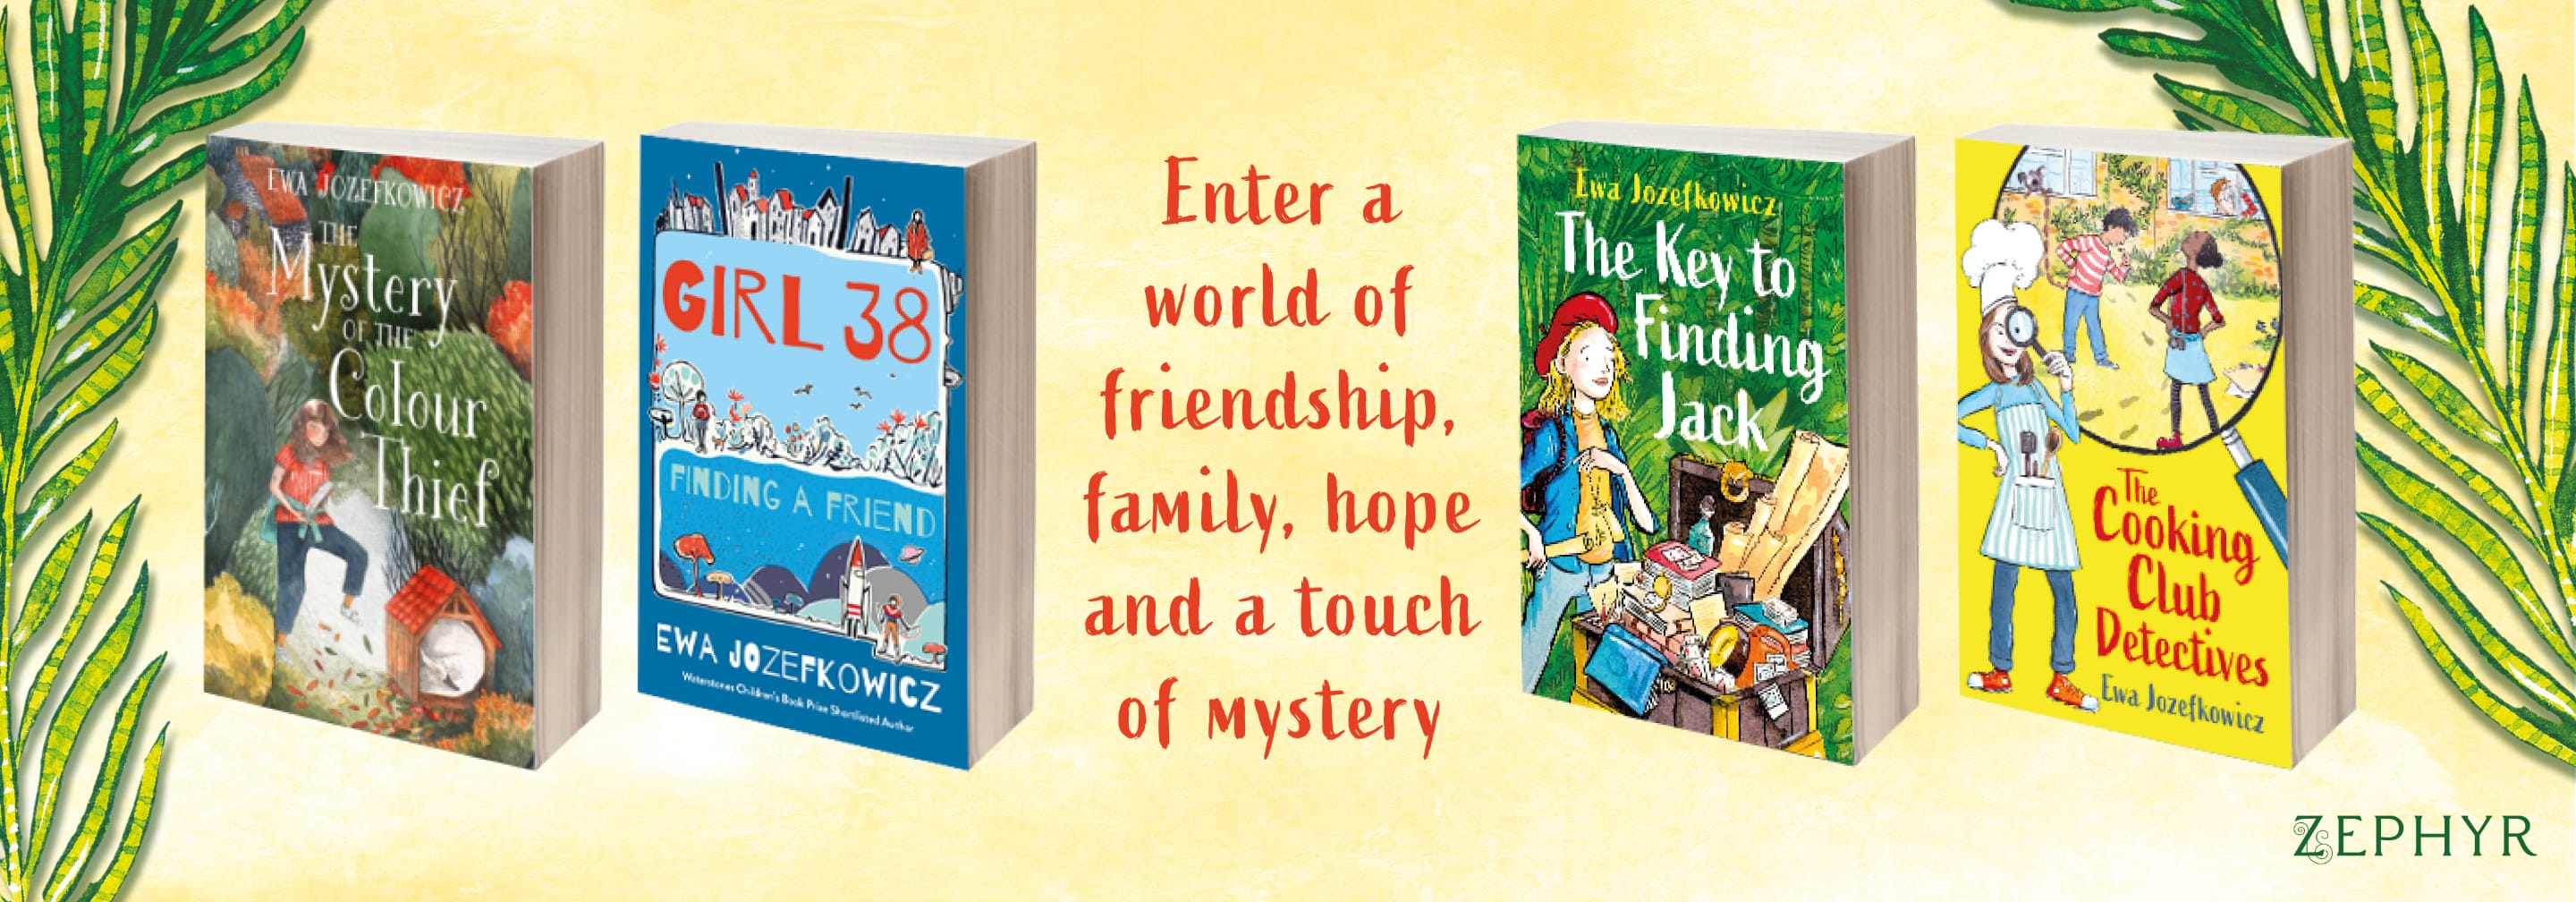 Enter a world of friendship, family, hope and a touch of mystery